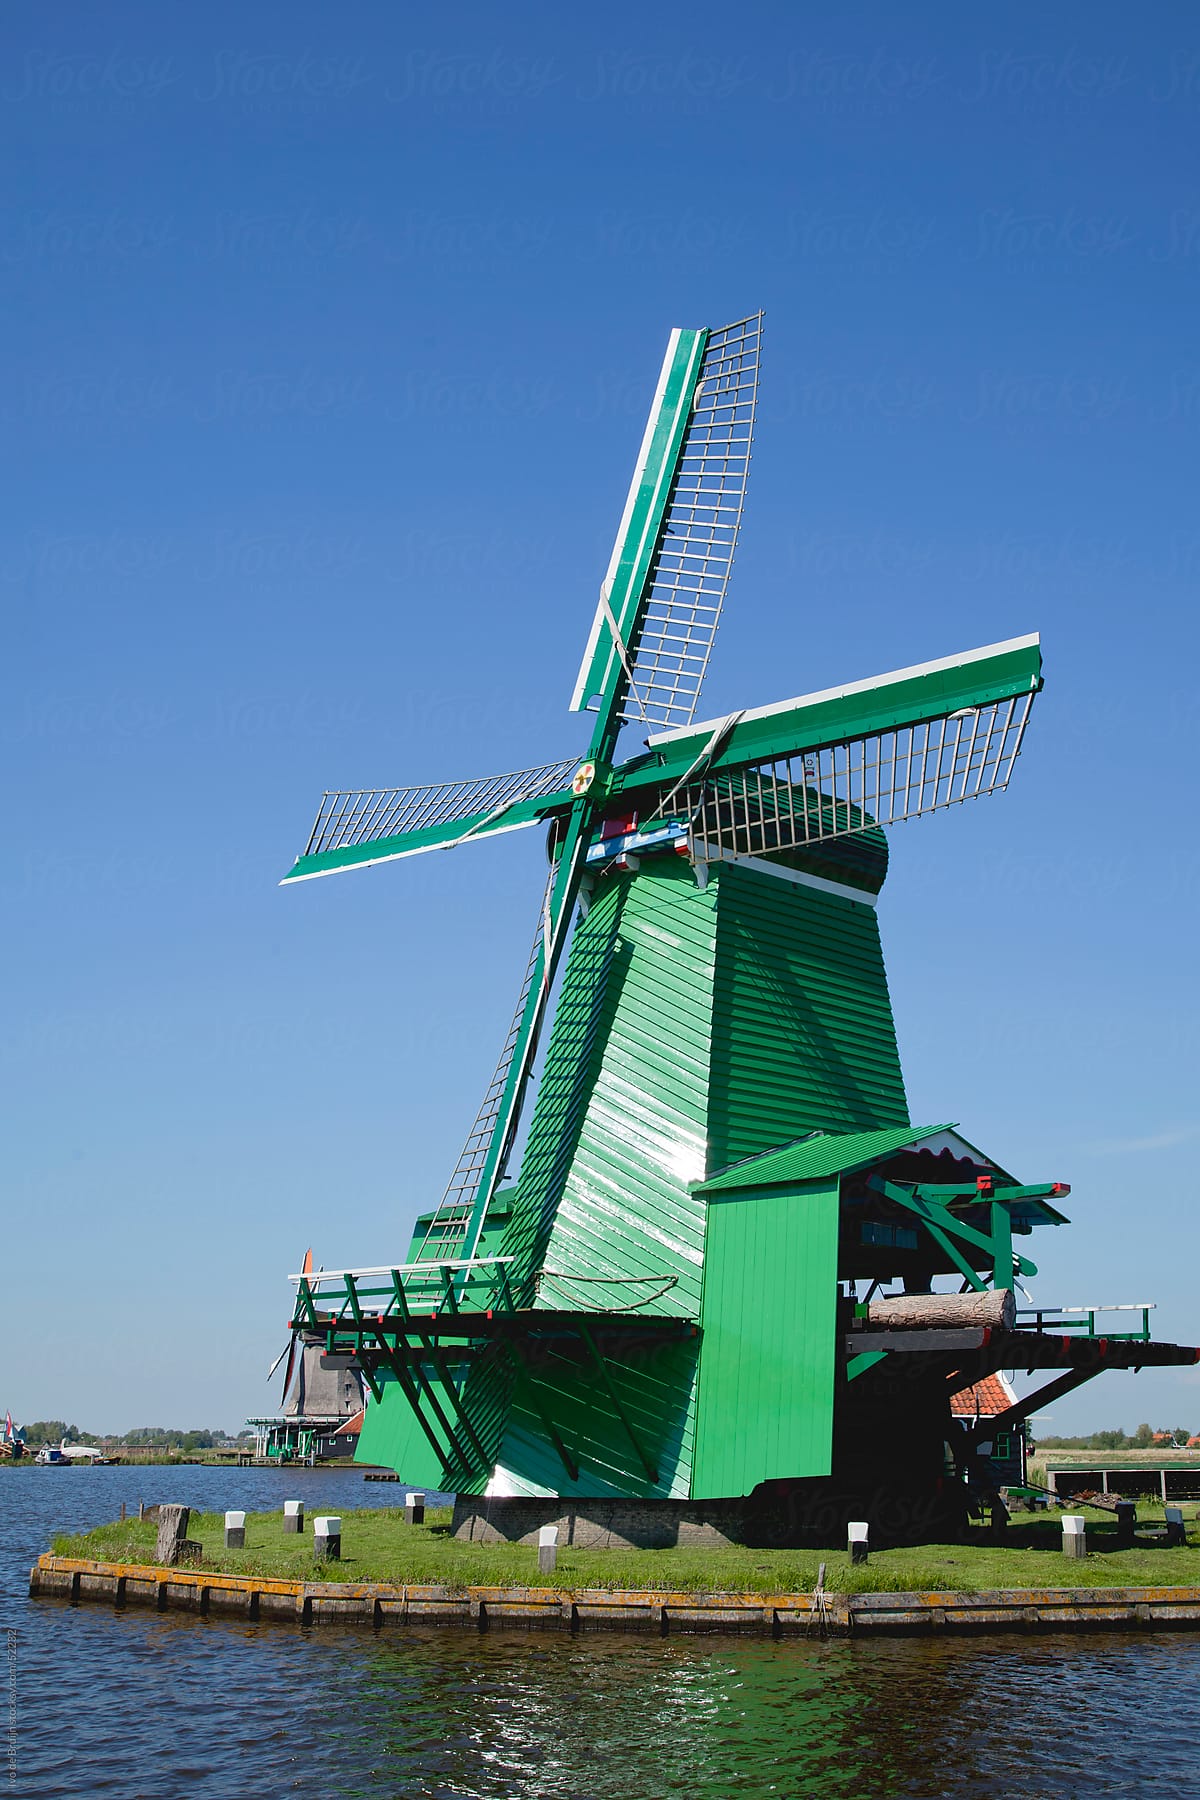 A classic green Dutch windmill surrounded by water under a clear blue sky